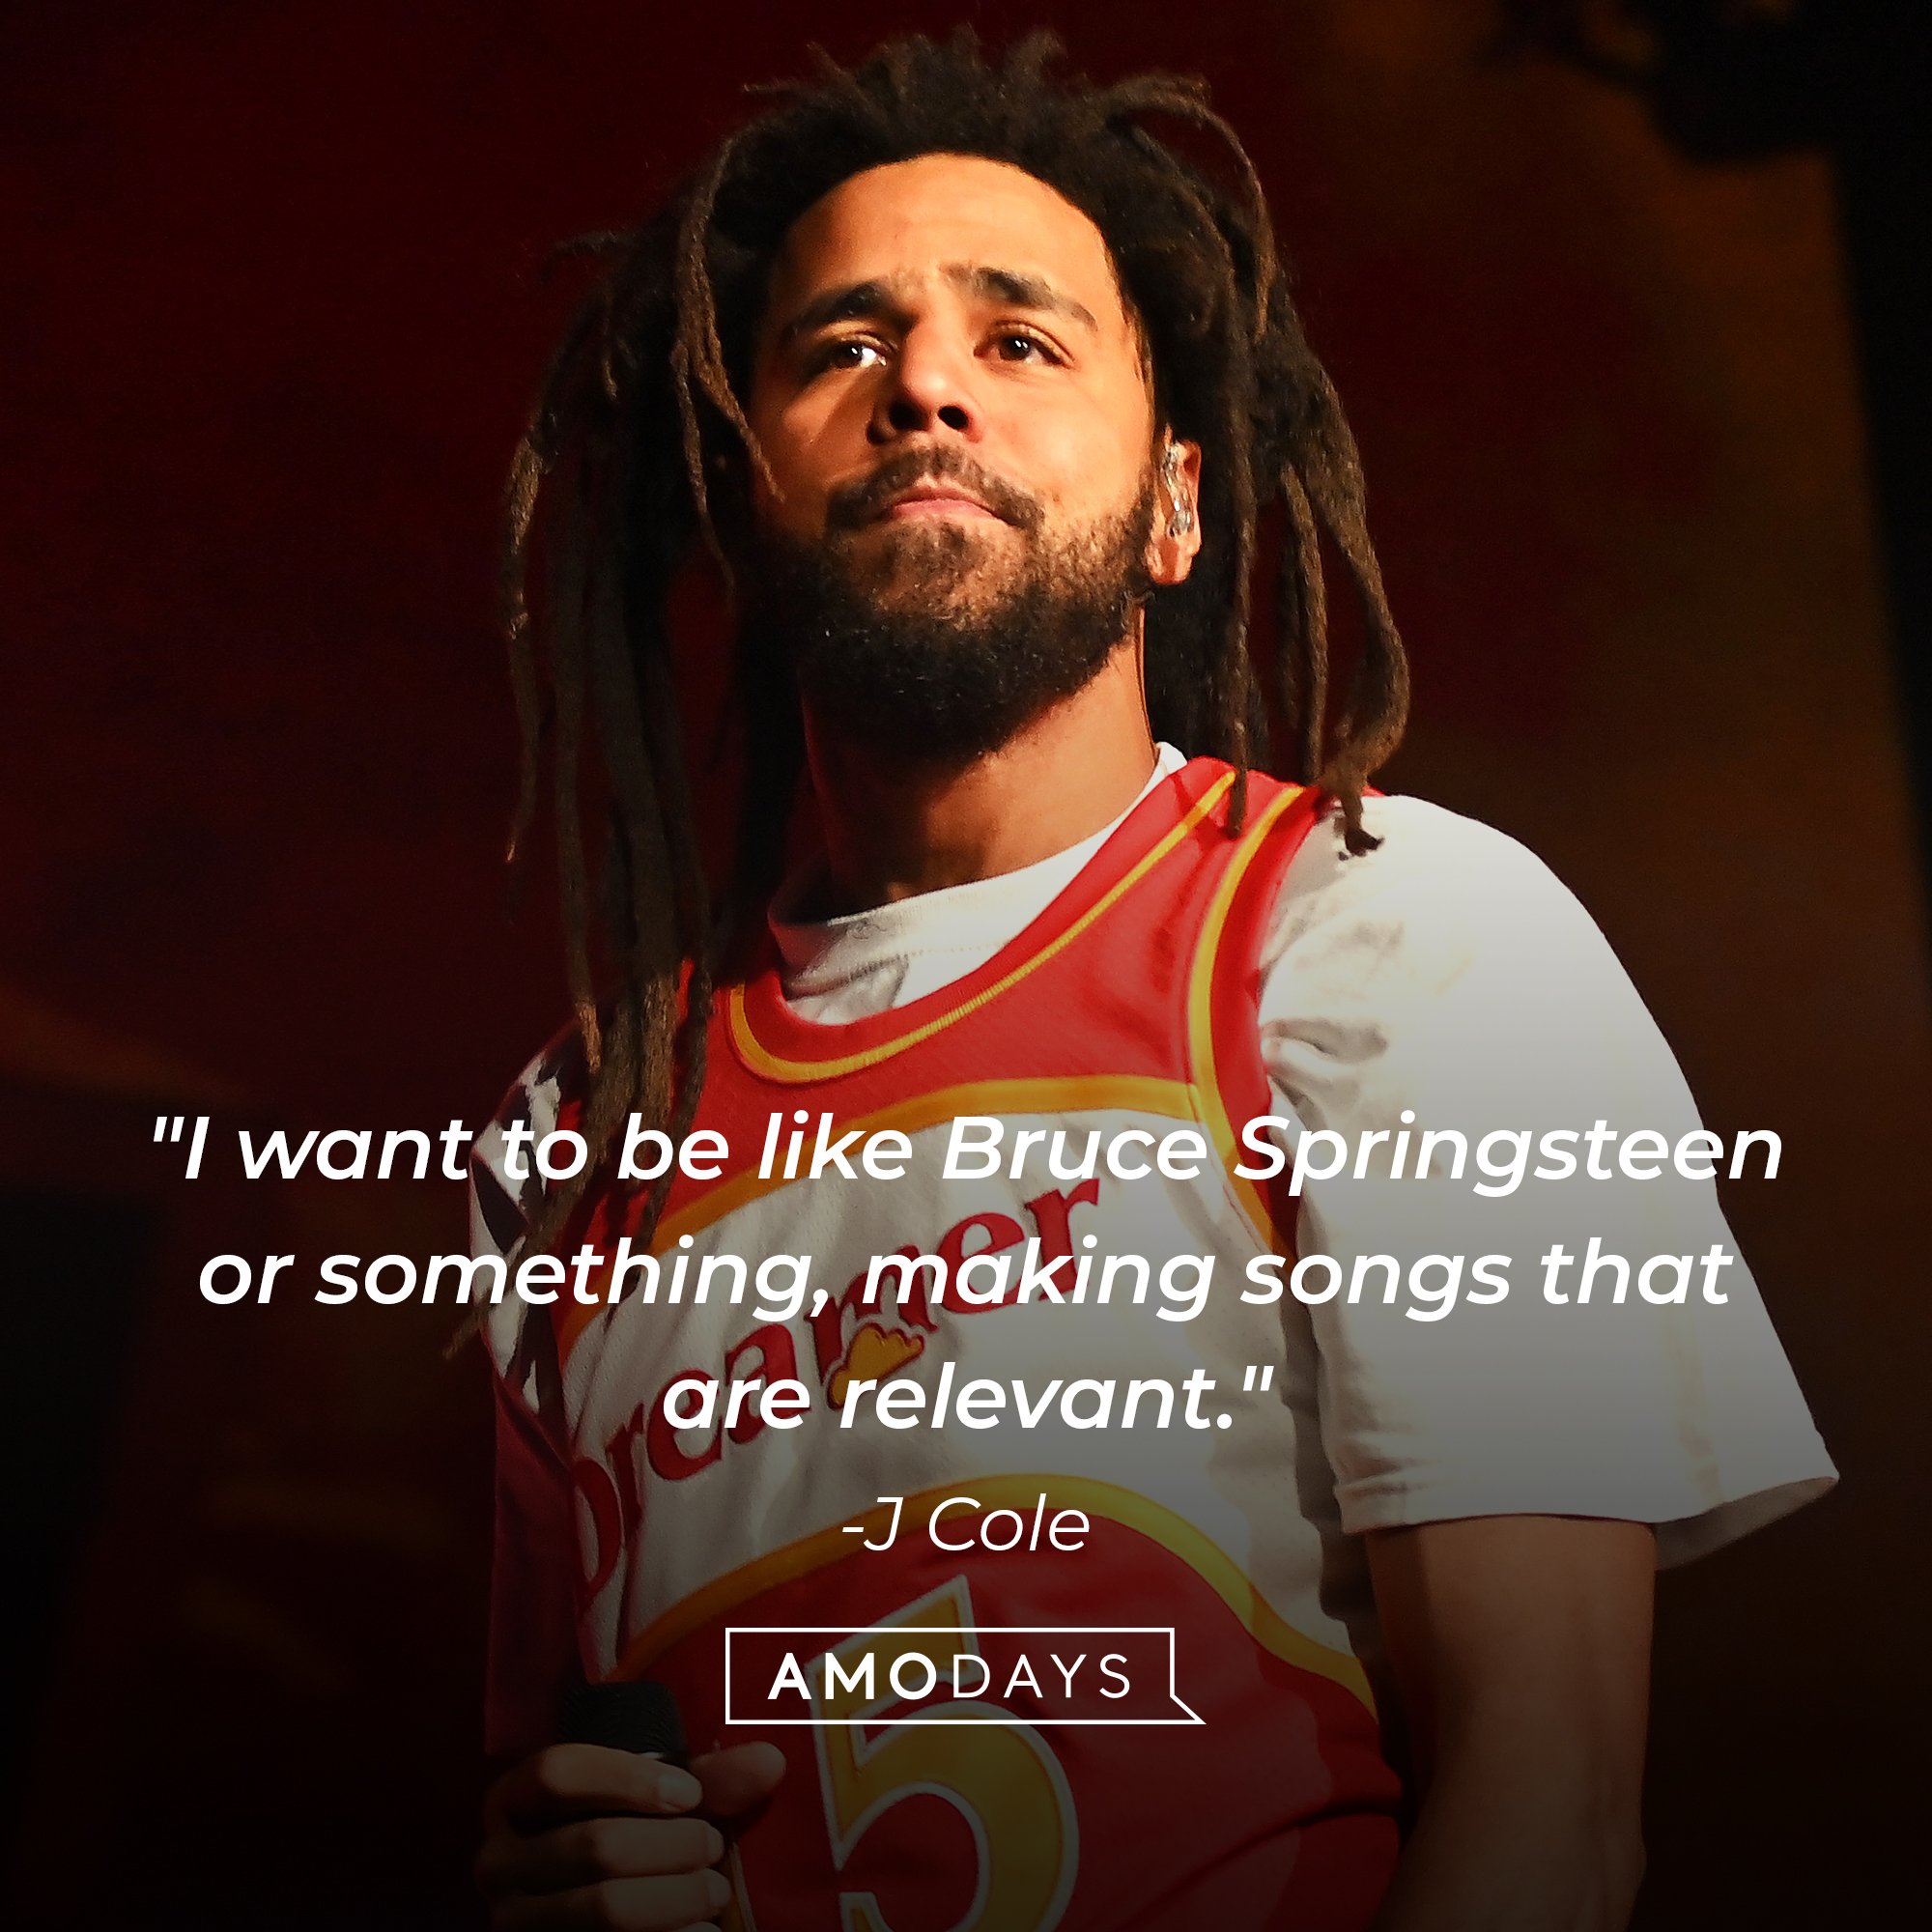 J Cole's quote: "I want to be like Bruce Springsteen or something, making songs that are relevant." | Image: AmoDays